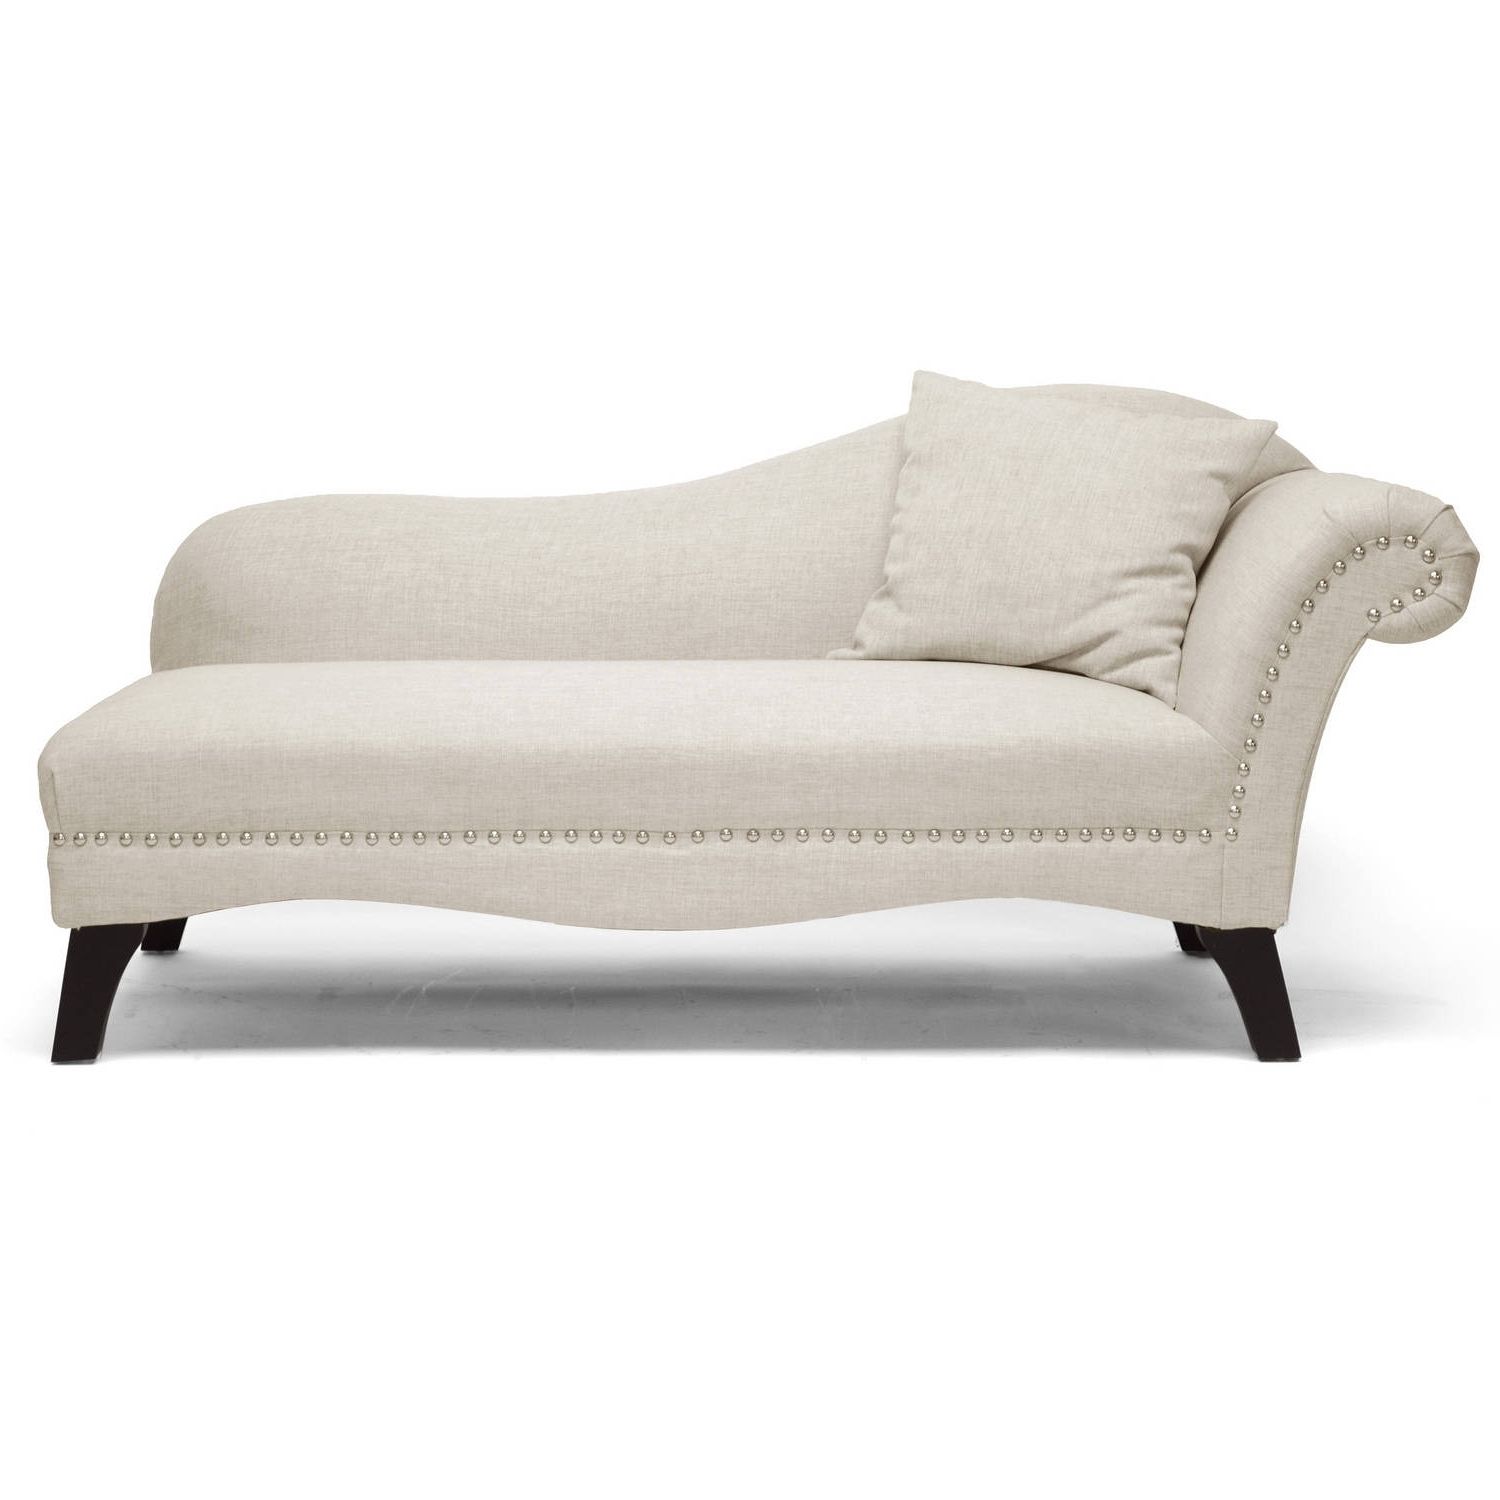 Favorite Chaise Couch Lounges Intended For Chaise Lounges – Walmart (View 1 of 15)